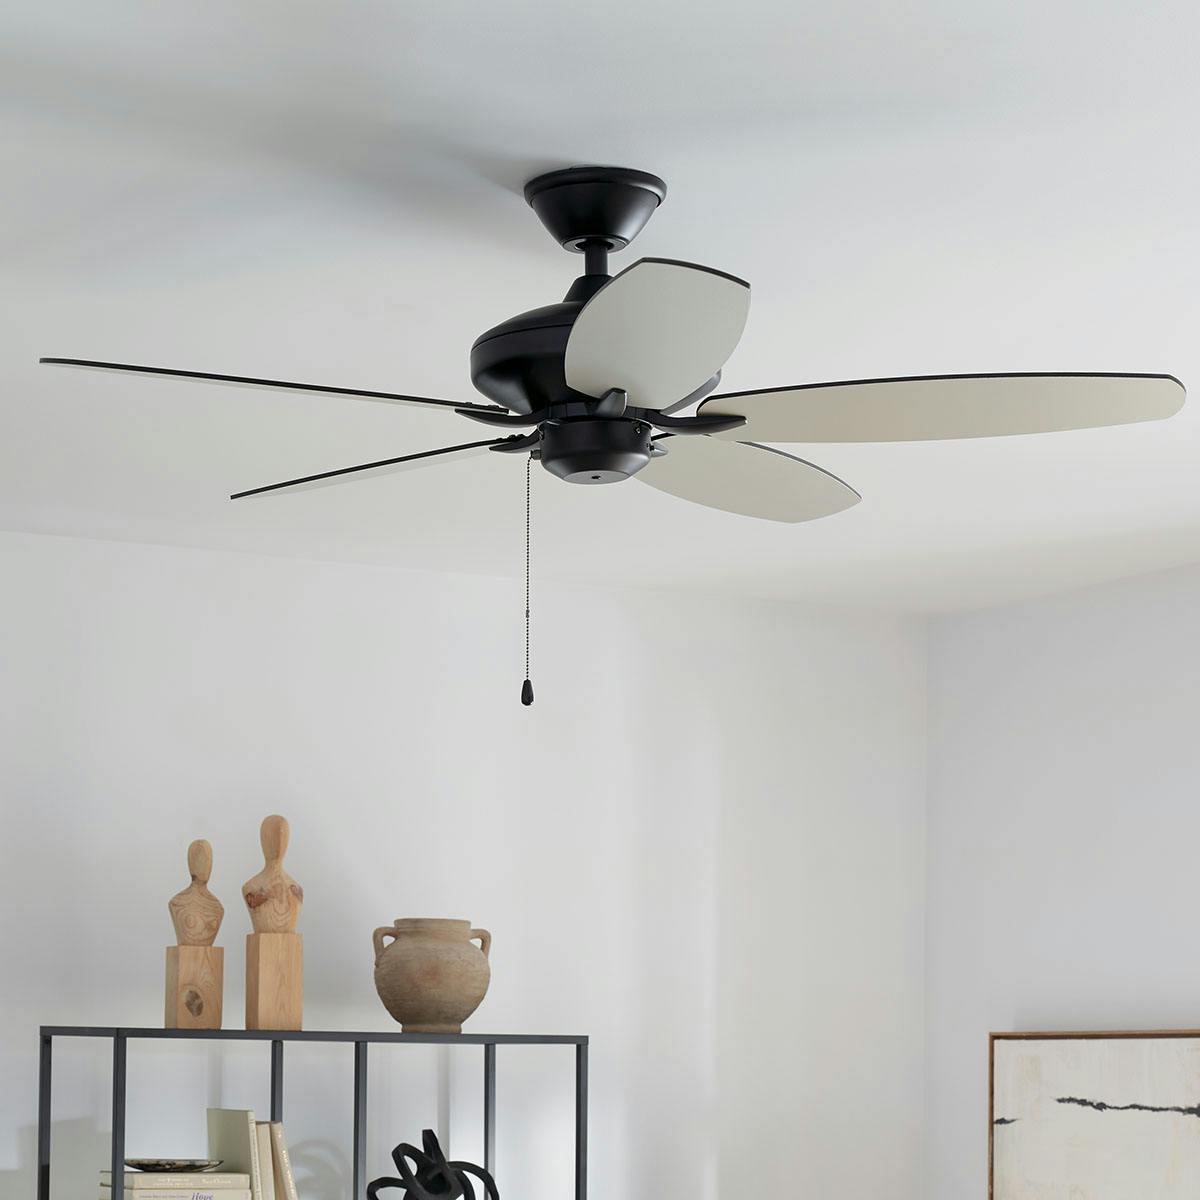 Day time living room featuring Renew ceiling fan 330164SBK